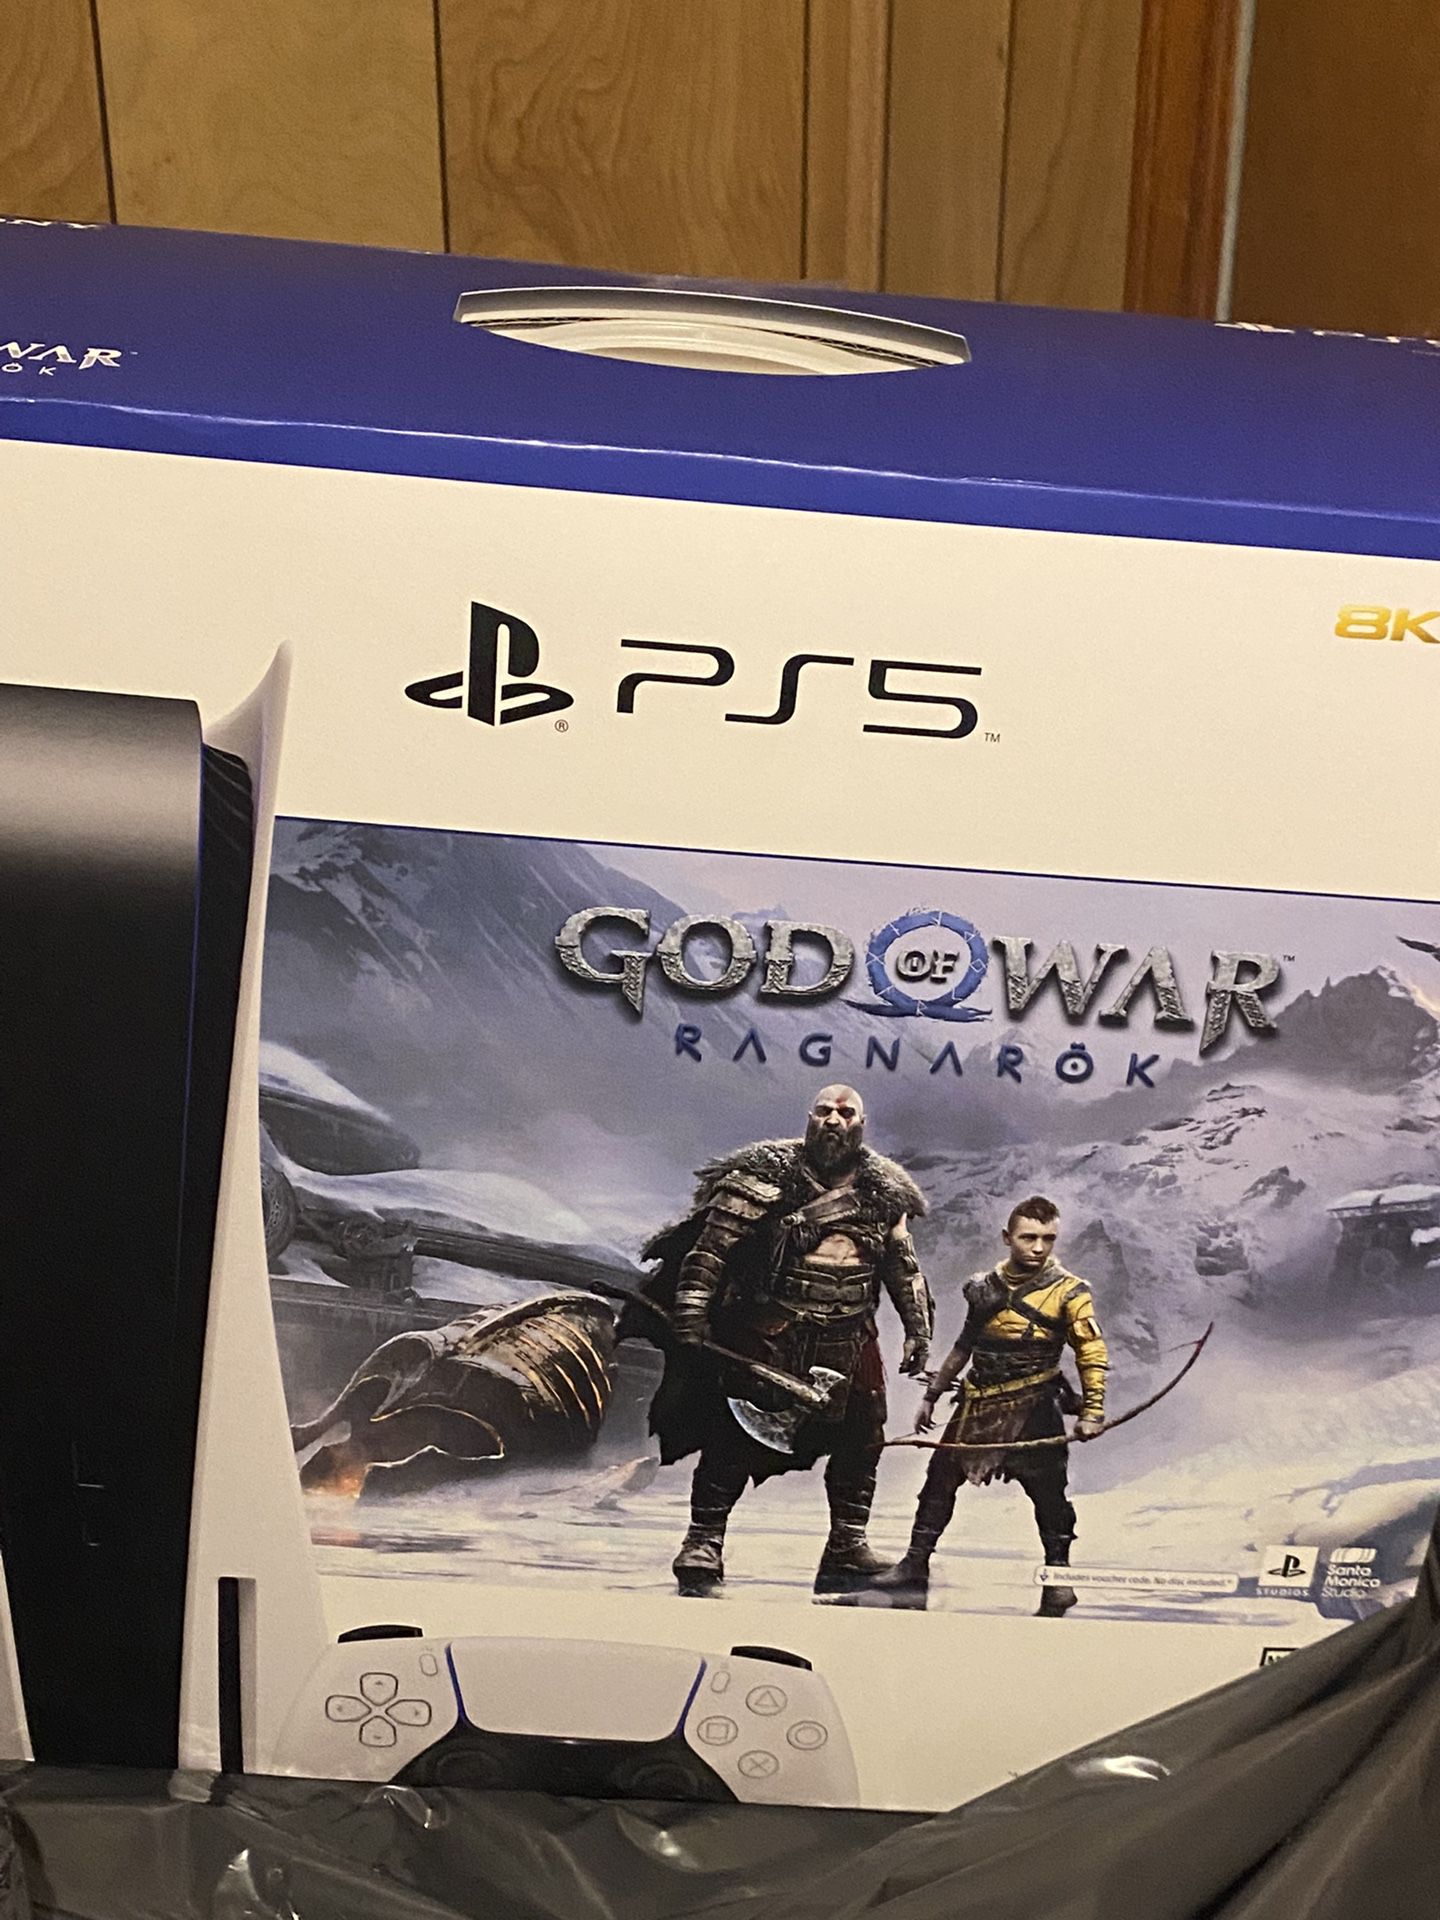 Ps5 Brand New In Box